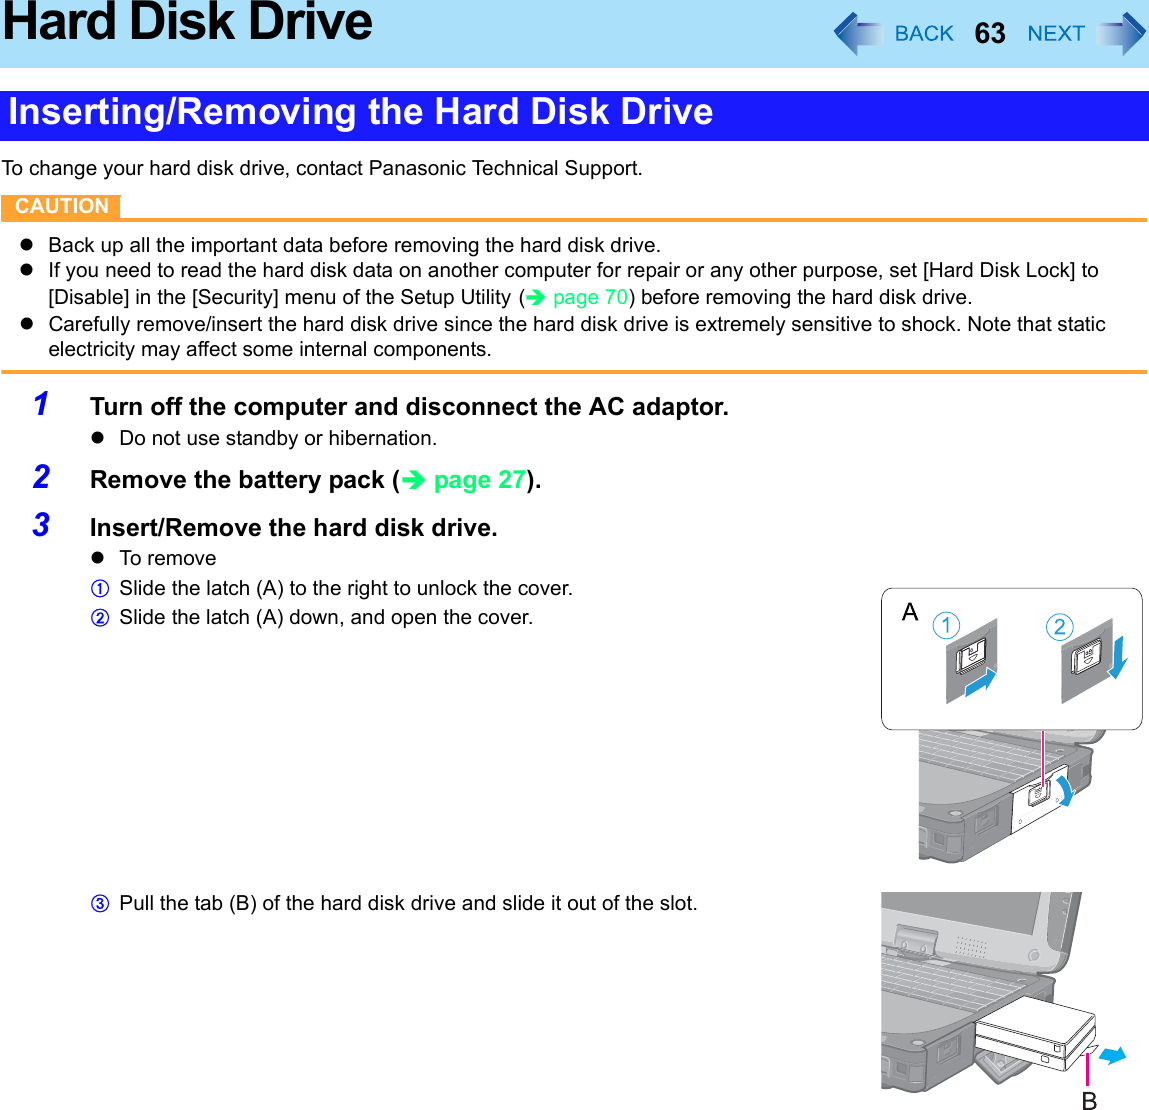 63Hard Disk DriveTo change your hard disk drive, contact Panasonic Technical Support.CAUTIONzBack up all the important data before removing the hard disk drive.zIf you need to read the hard disk data on another computer for repair or any other purpose, set [Hard Disk Lock] to [Disable] in the [Security] menu of the Setup Utility (Îpage 70) before removing the hard disk drive.zCarefully remove/insert the hard disk drive since the hard disk drive is extremely sensitive to shock. Note that static electricity may affect some internal components.1Turn off the computer and disconnect the AC adaptor. zDo not use standby or hibernation.2Remove the battery pack (Îpage 27).3Insert/Remove the hard disk drive.zTo r em oveASlide the latch (A) to the right to unlock the cover.BSlide the latch (A) down, and open the cover.CPull the tab (B) of the hard disk drive and slide it out of the slot.Inserting/Removing the Hard Disk Drive